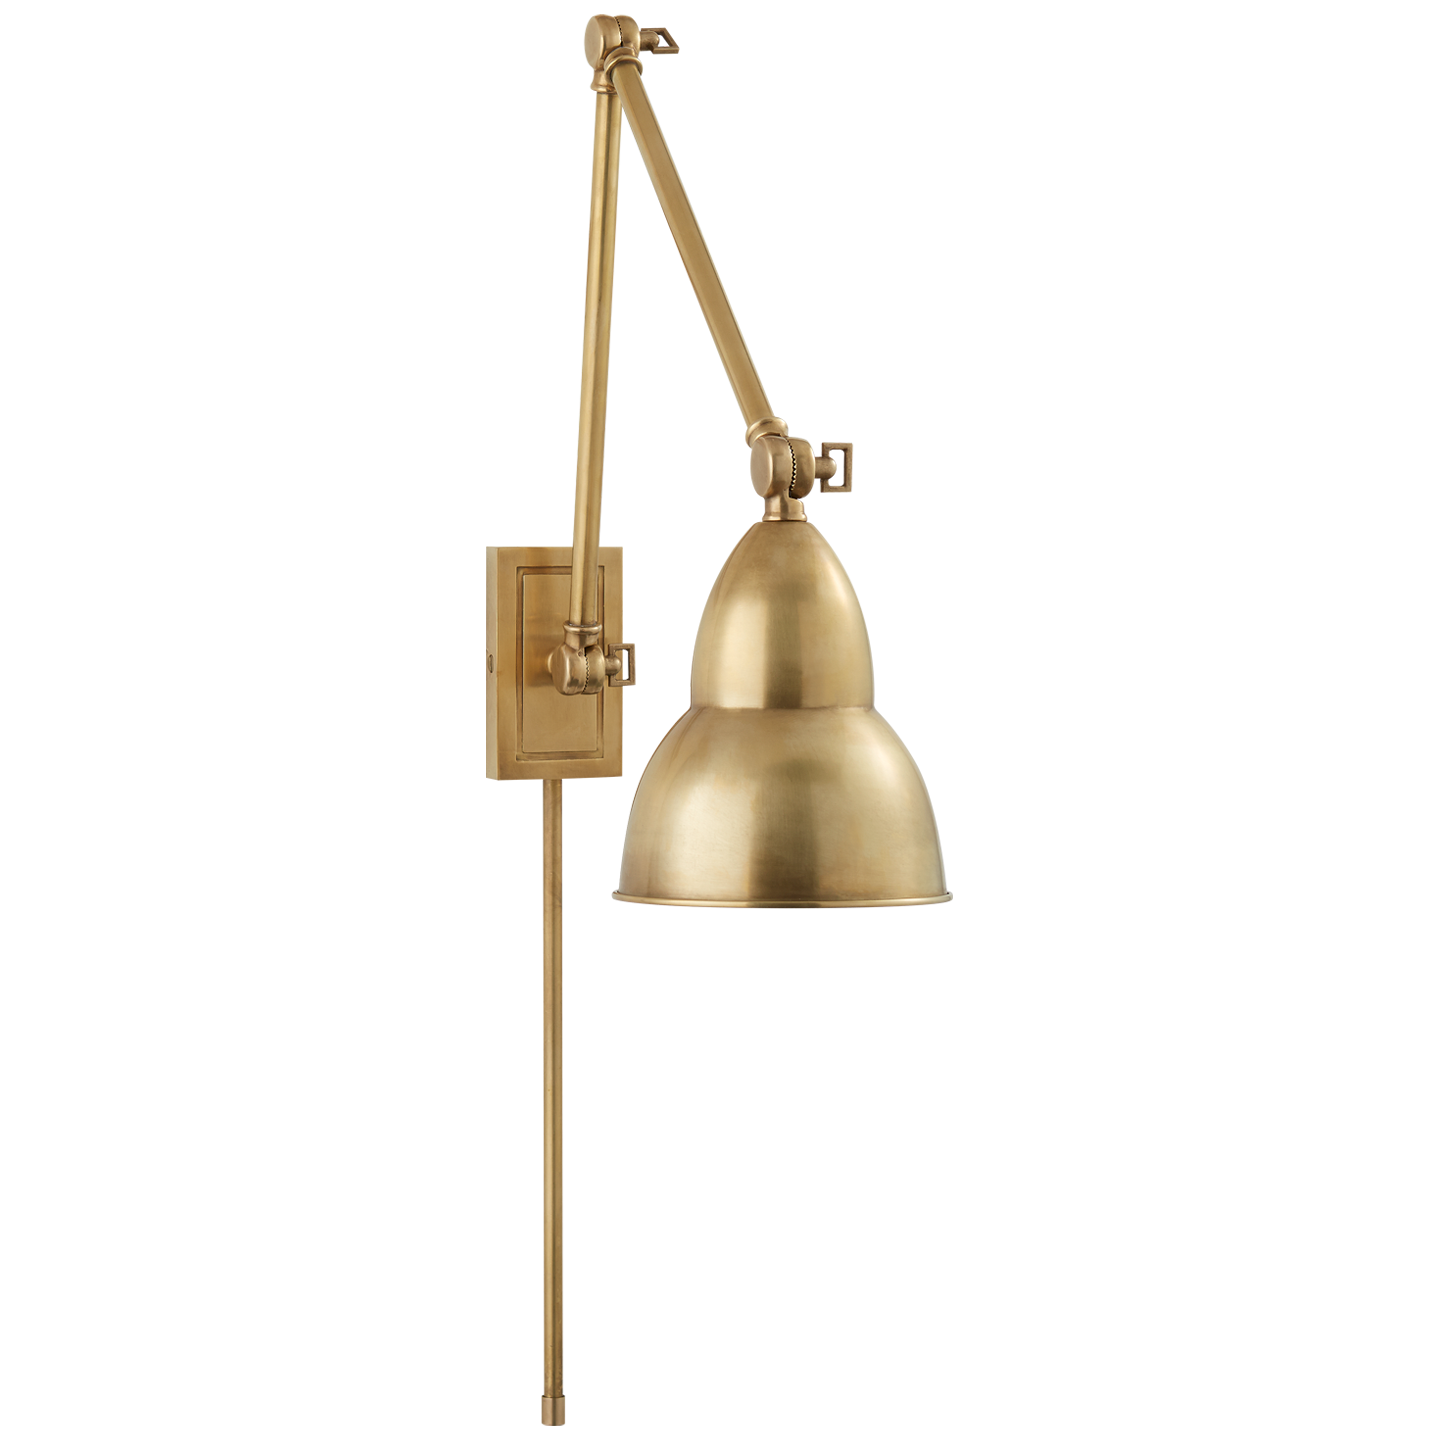 We love the functionality of this French Library Double Arm Wall lamp. Hang in your bedroom, office, or other area that needs extra light.   Designer: Studio VC